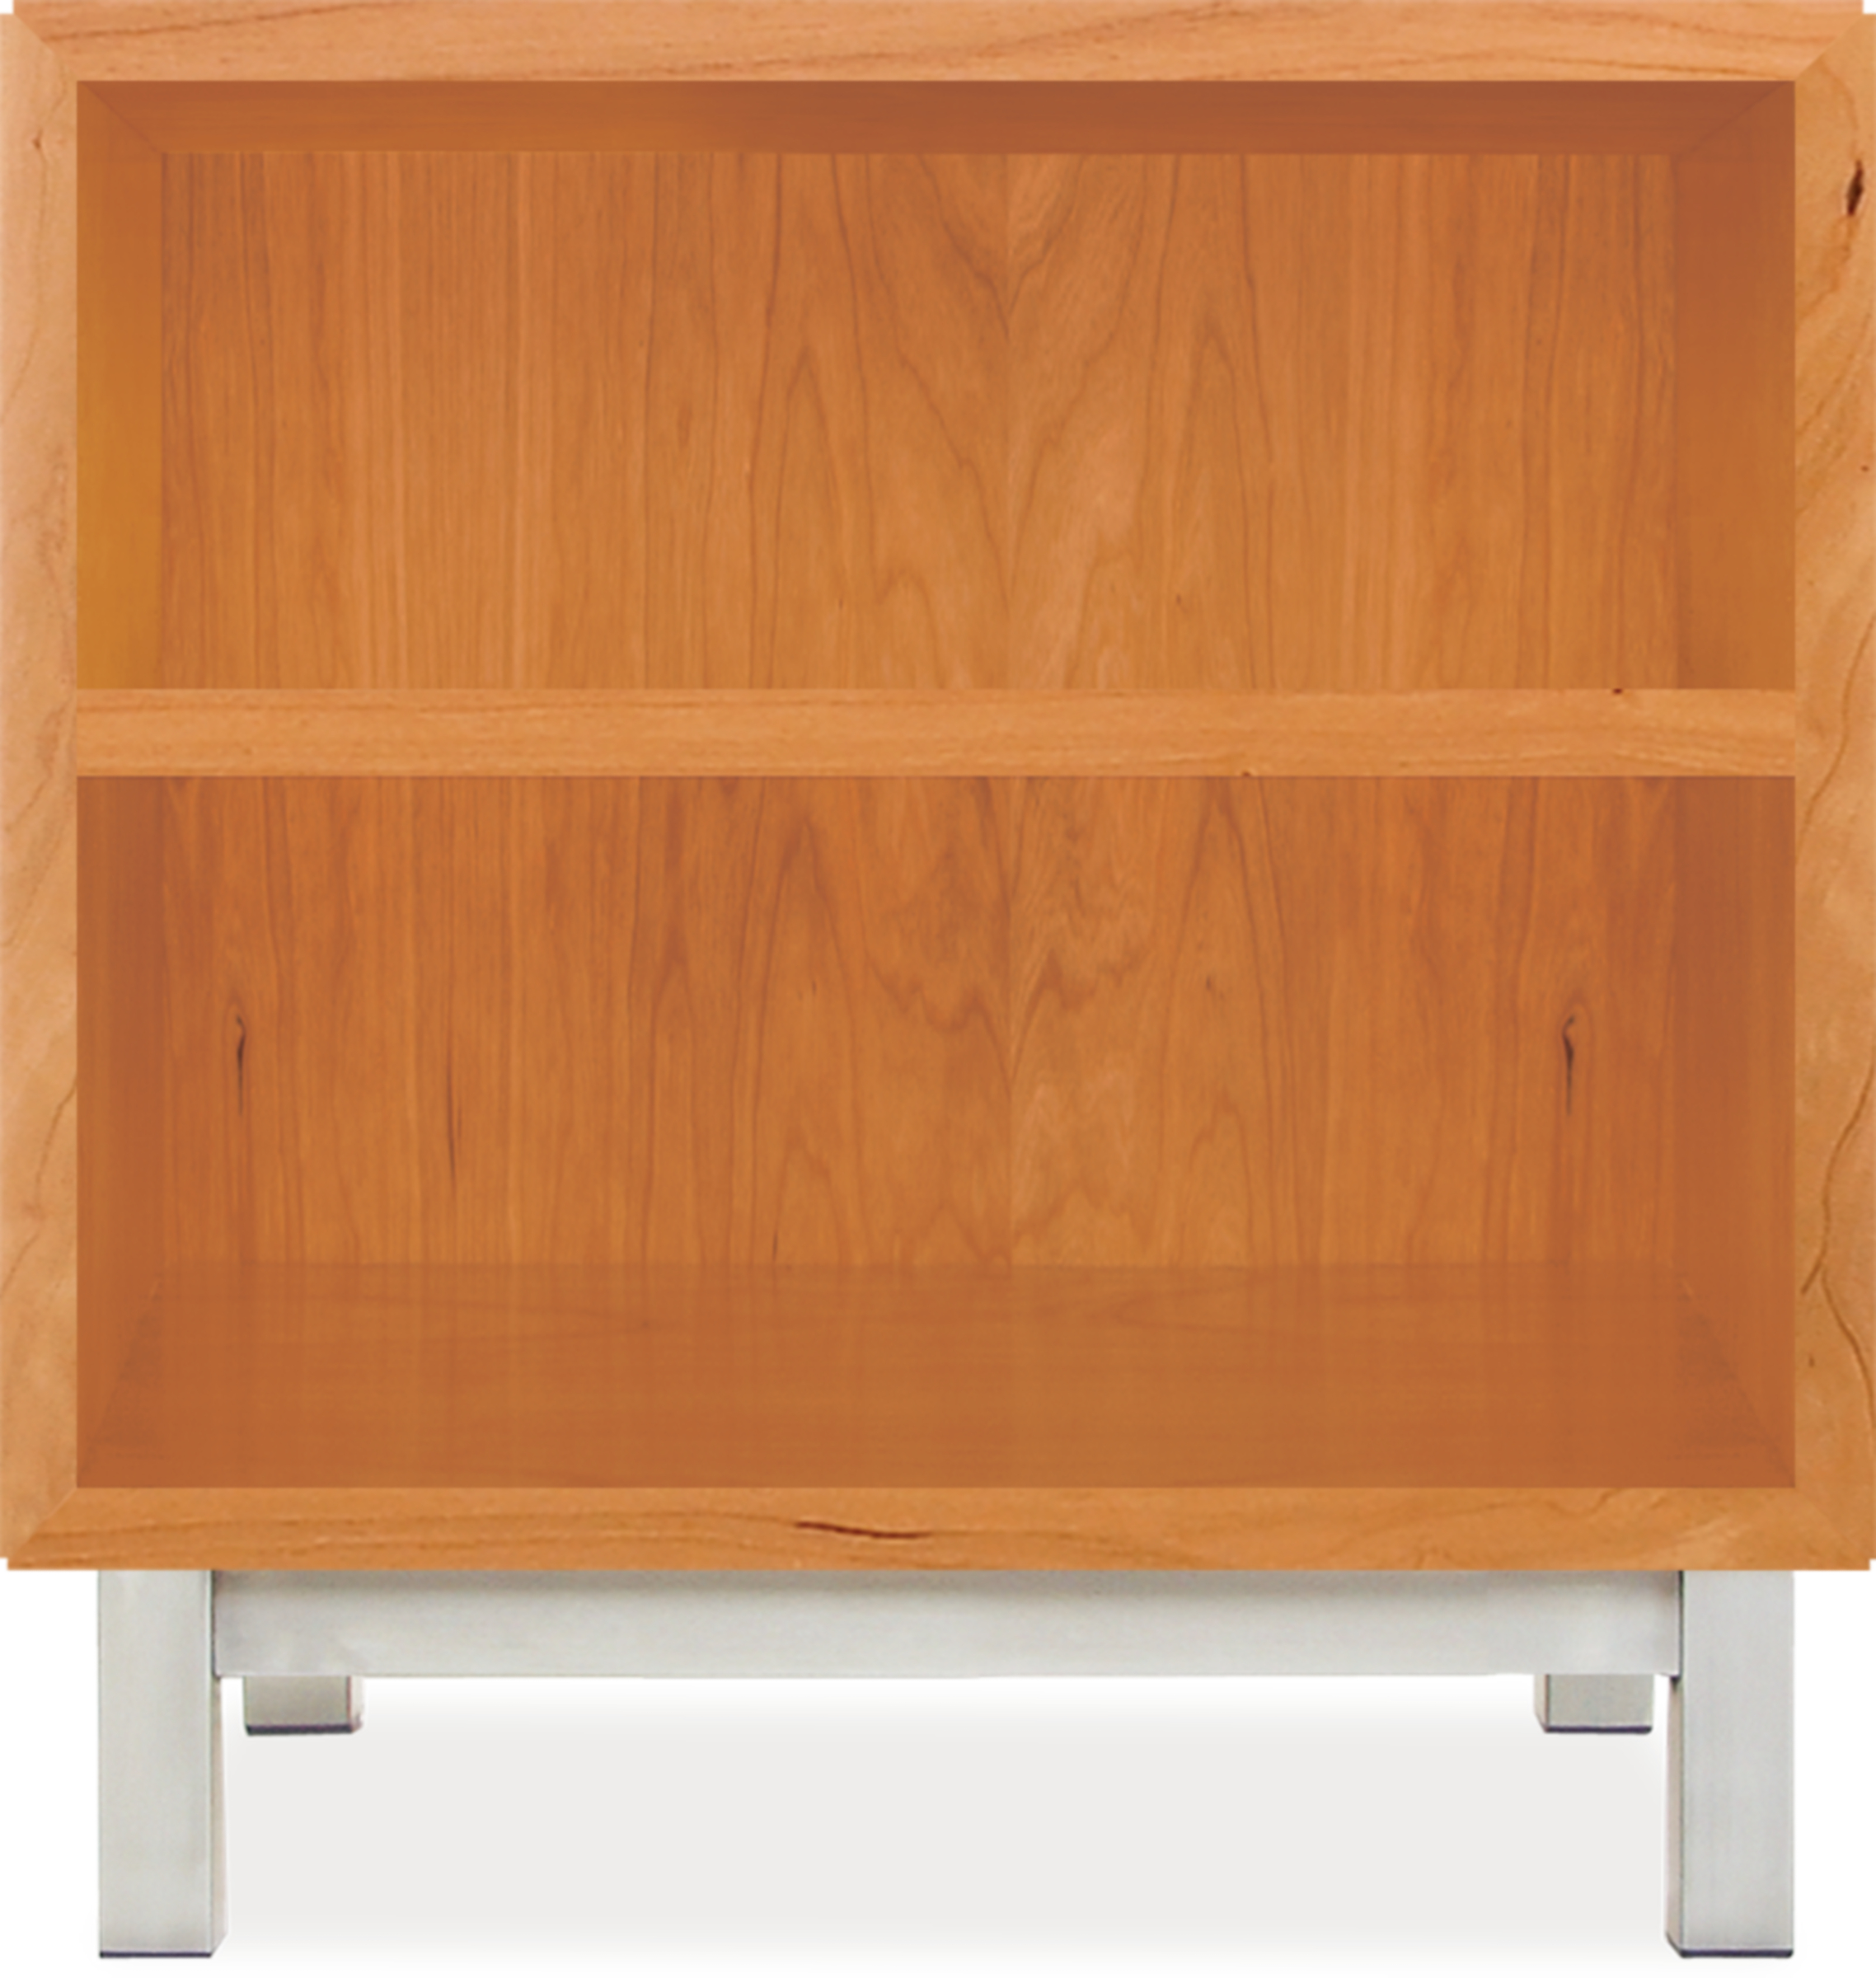 Copenhagen 24w 20d 25h Cabinet in Cherry with Stainless Steel